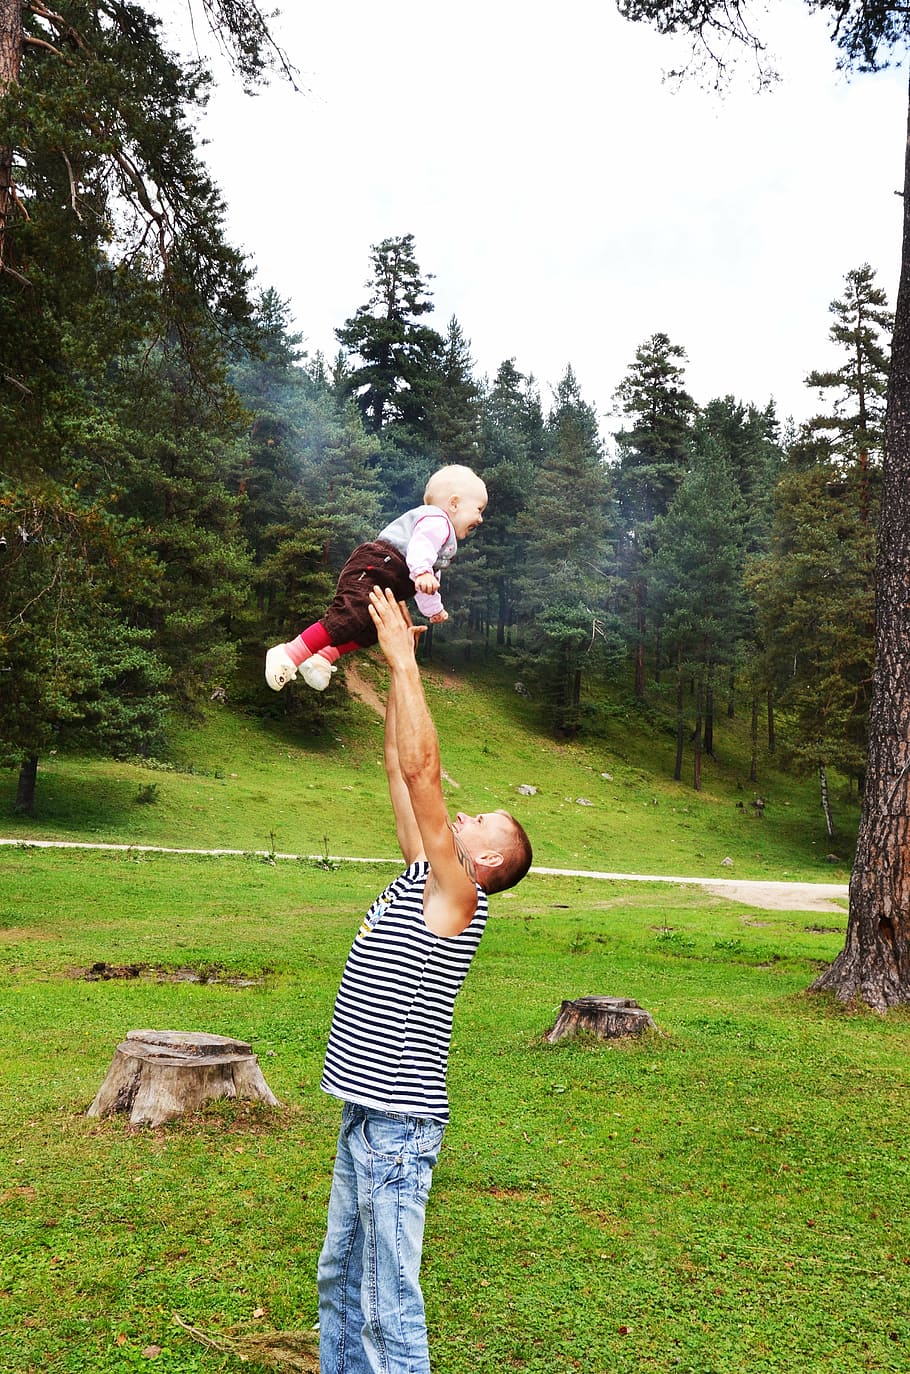 man, lifting, child, grass field, joy, dad, baby, babe, family, nature